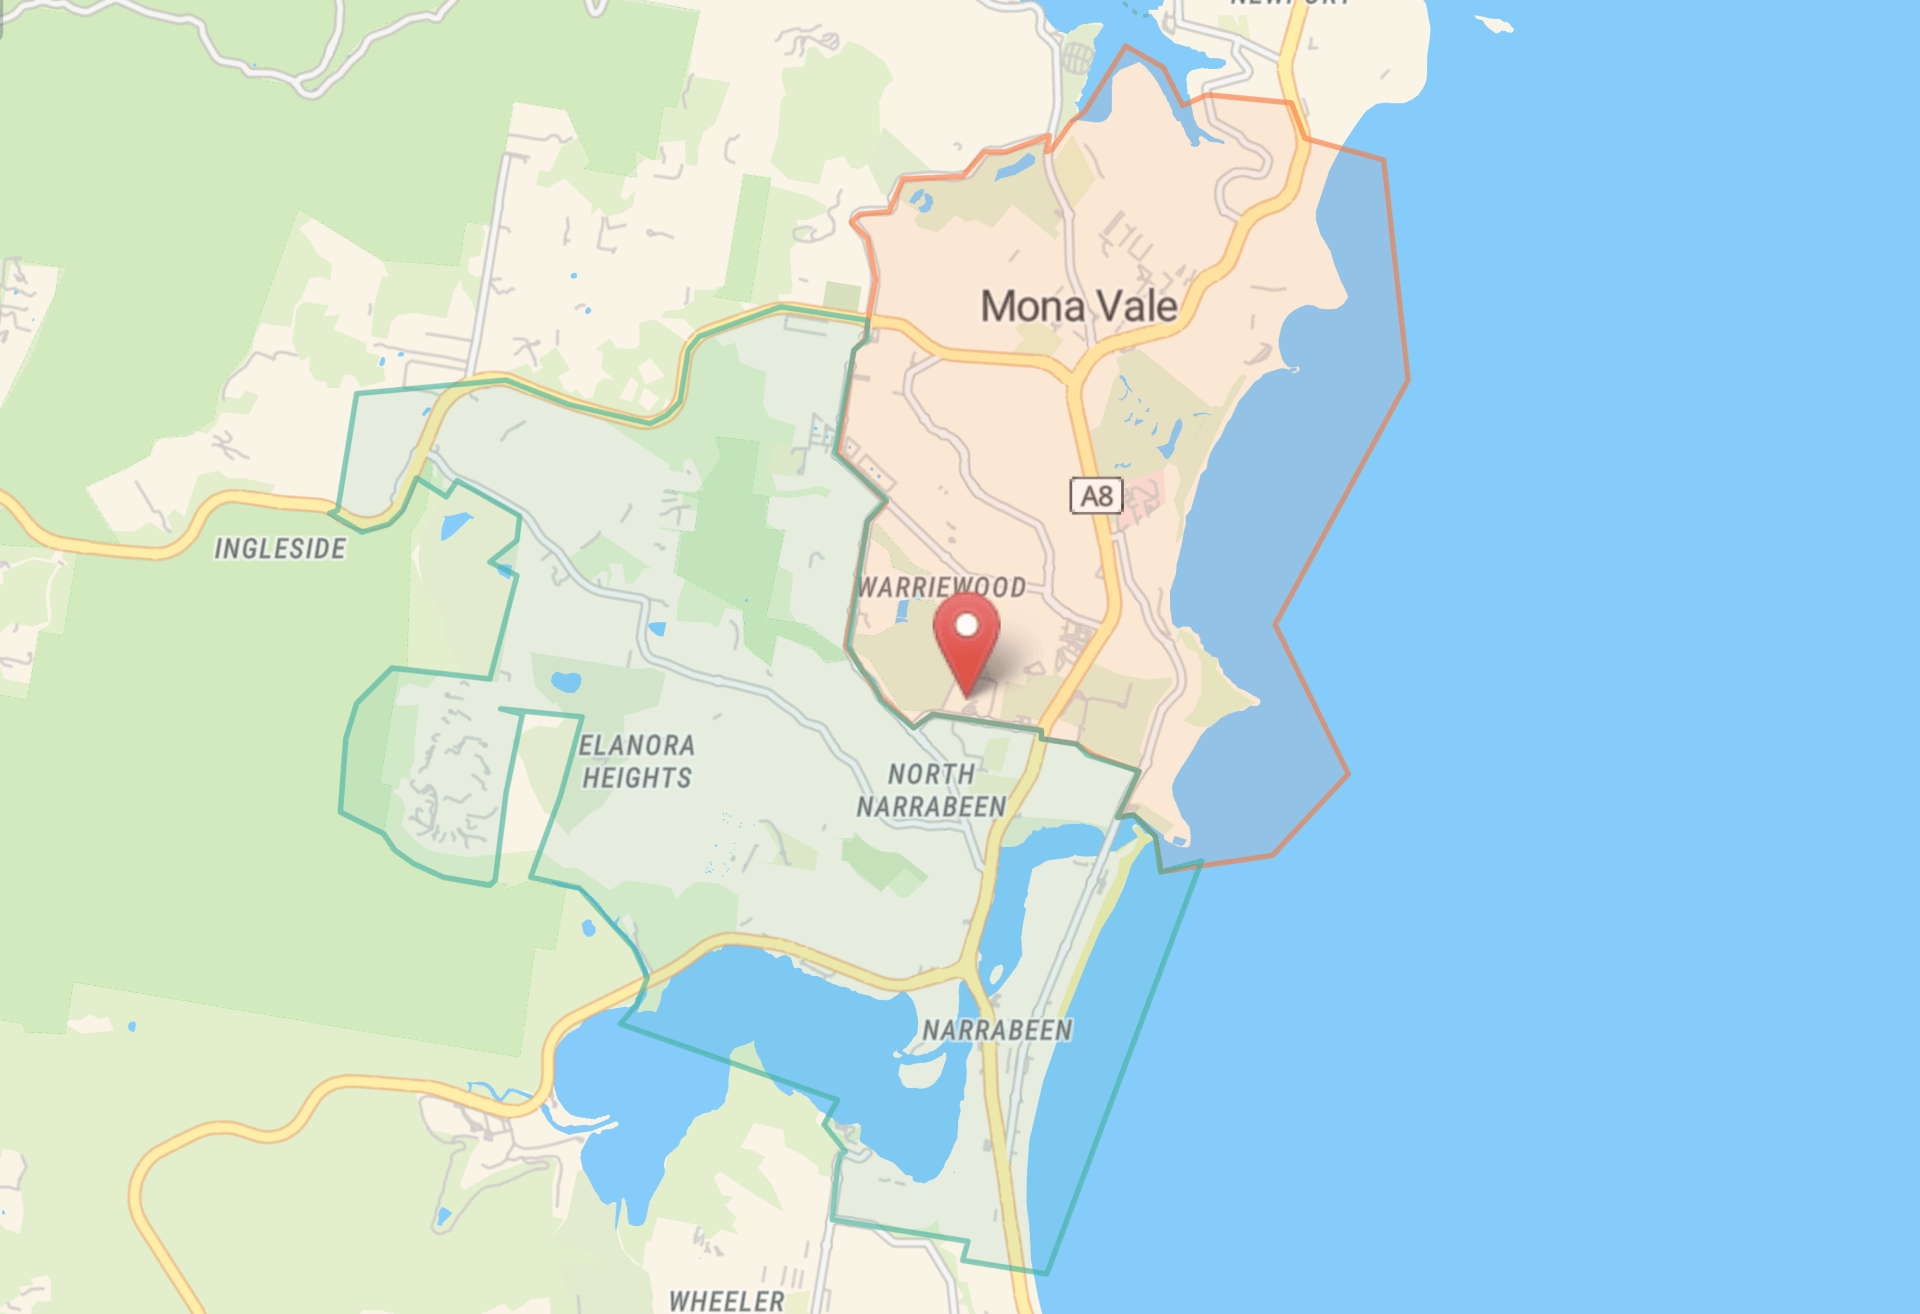 Delivery map on Warriewood, Mona Vale, Narrabeen, Ingleside, Elanora Heights